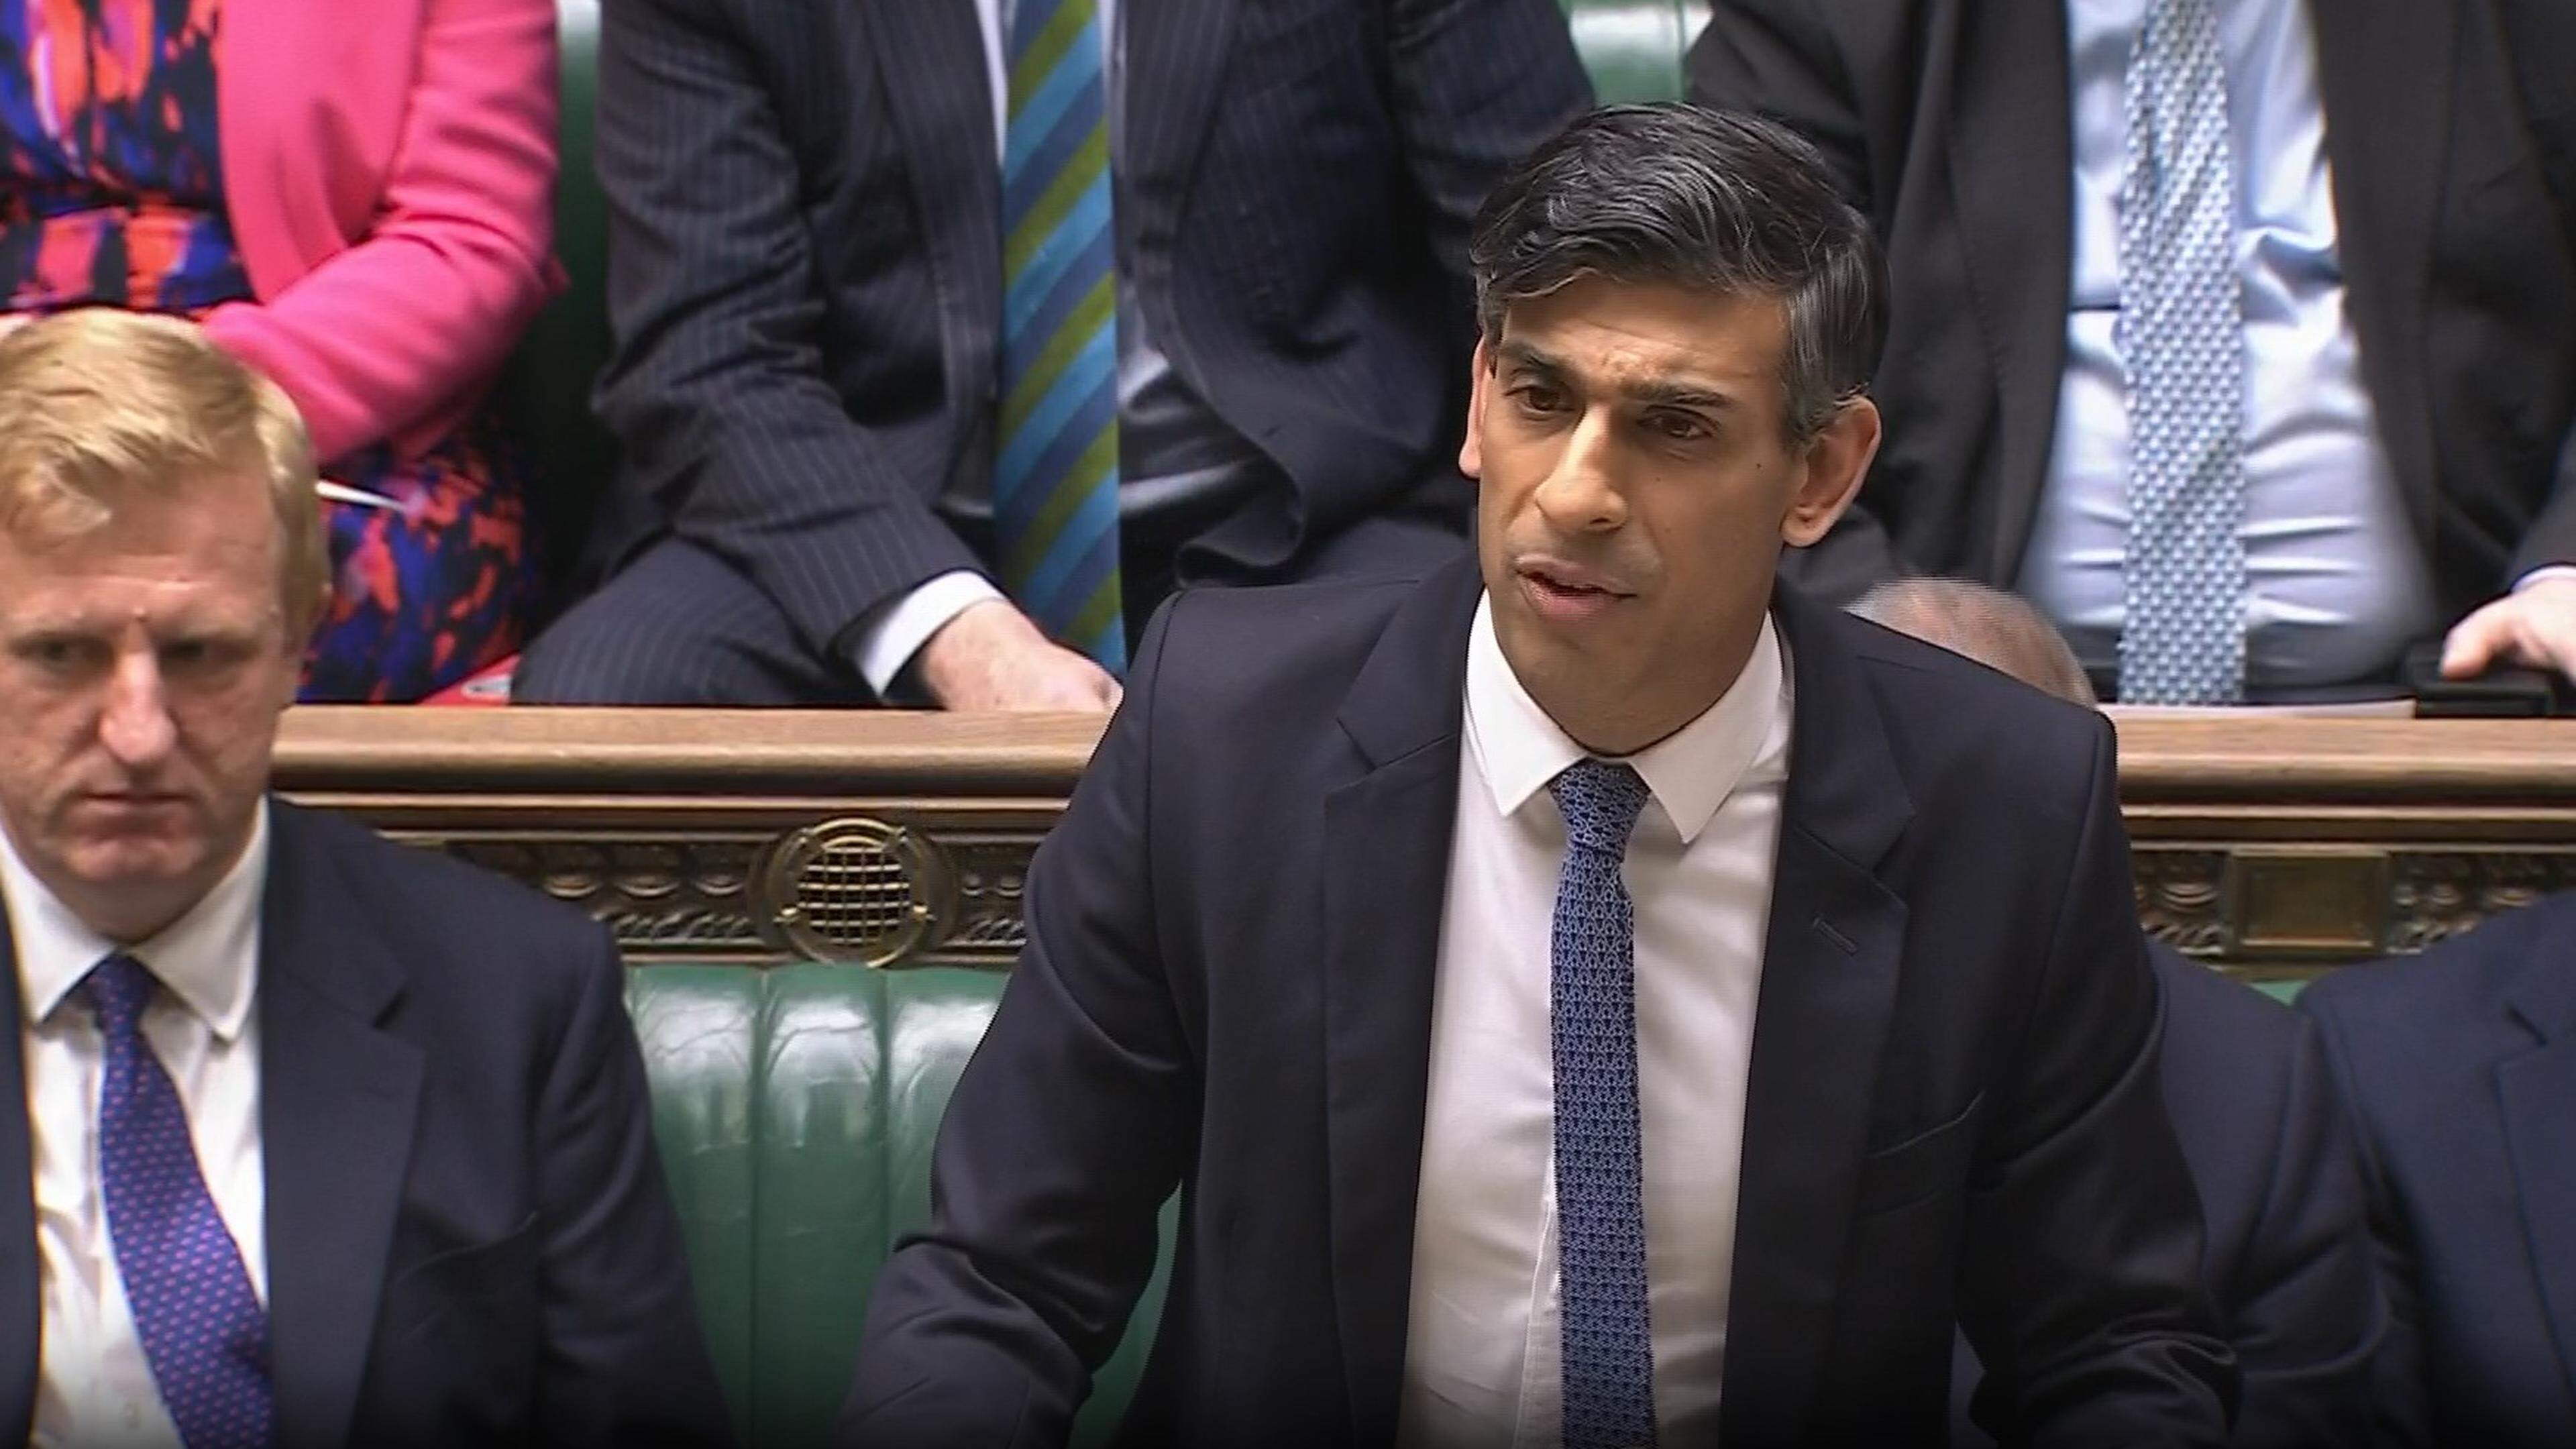 Sunak told the cabinet of his decision on Wednesday afternoon, defying opinion polls that give Sir Keir Starmer’s Labour party a lead of around 20 per cent